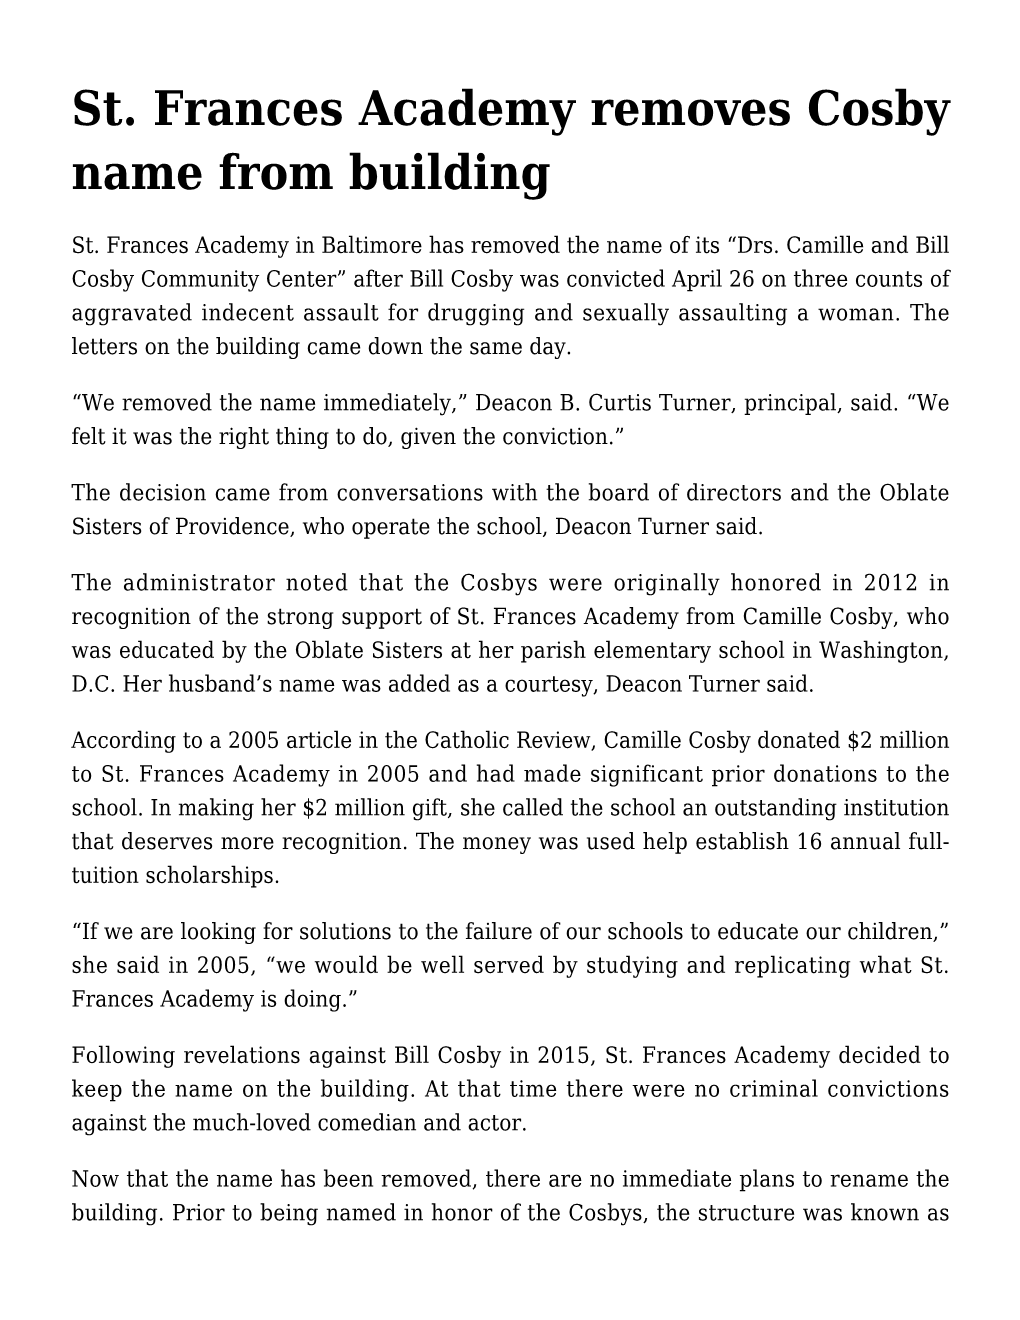 St. Frances Academy Removes Cosby Name from Building